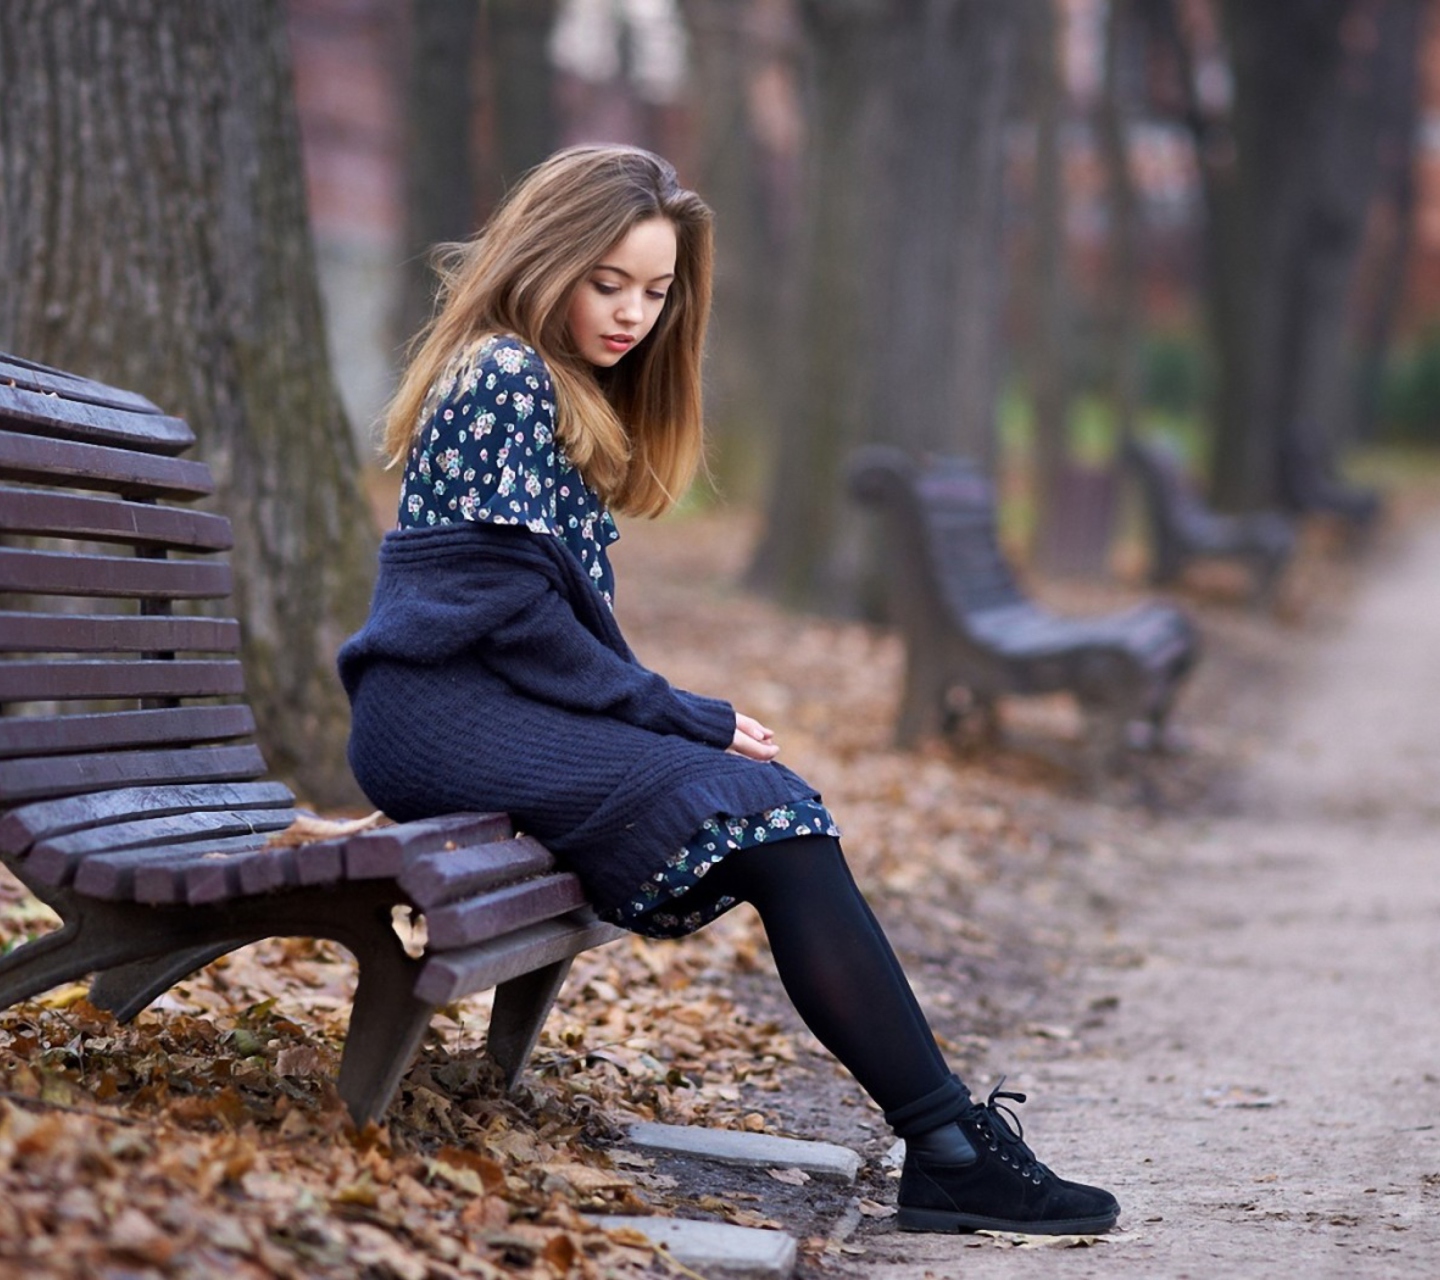 Beautiful Girl Sitting On Bench In Autumn Park wallpaper 1440x1280